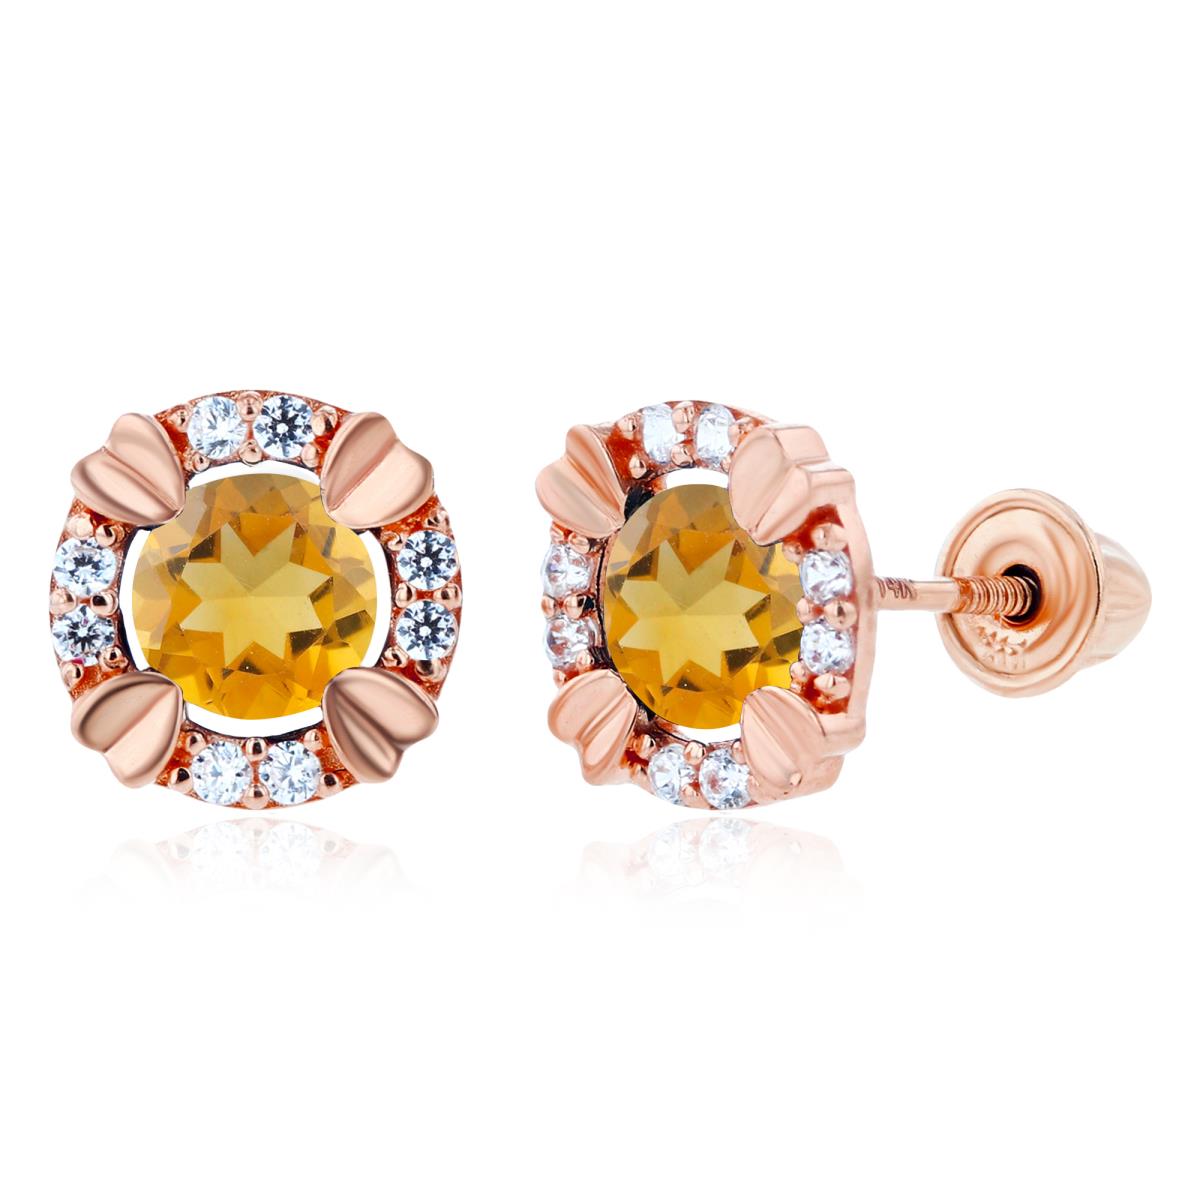 14K Rose Gold 4mm Round Citrine & 1mm Created White Sapphire Halo Screwback Earrings